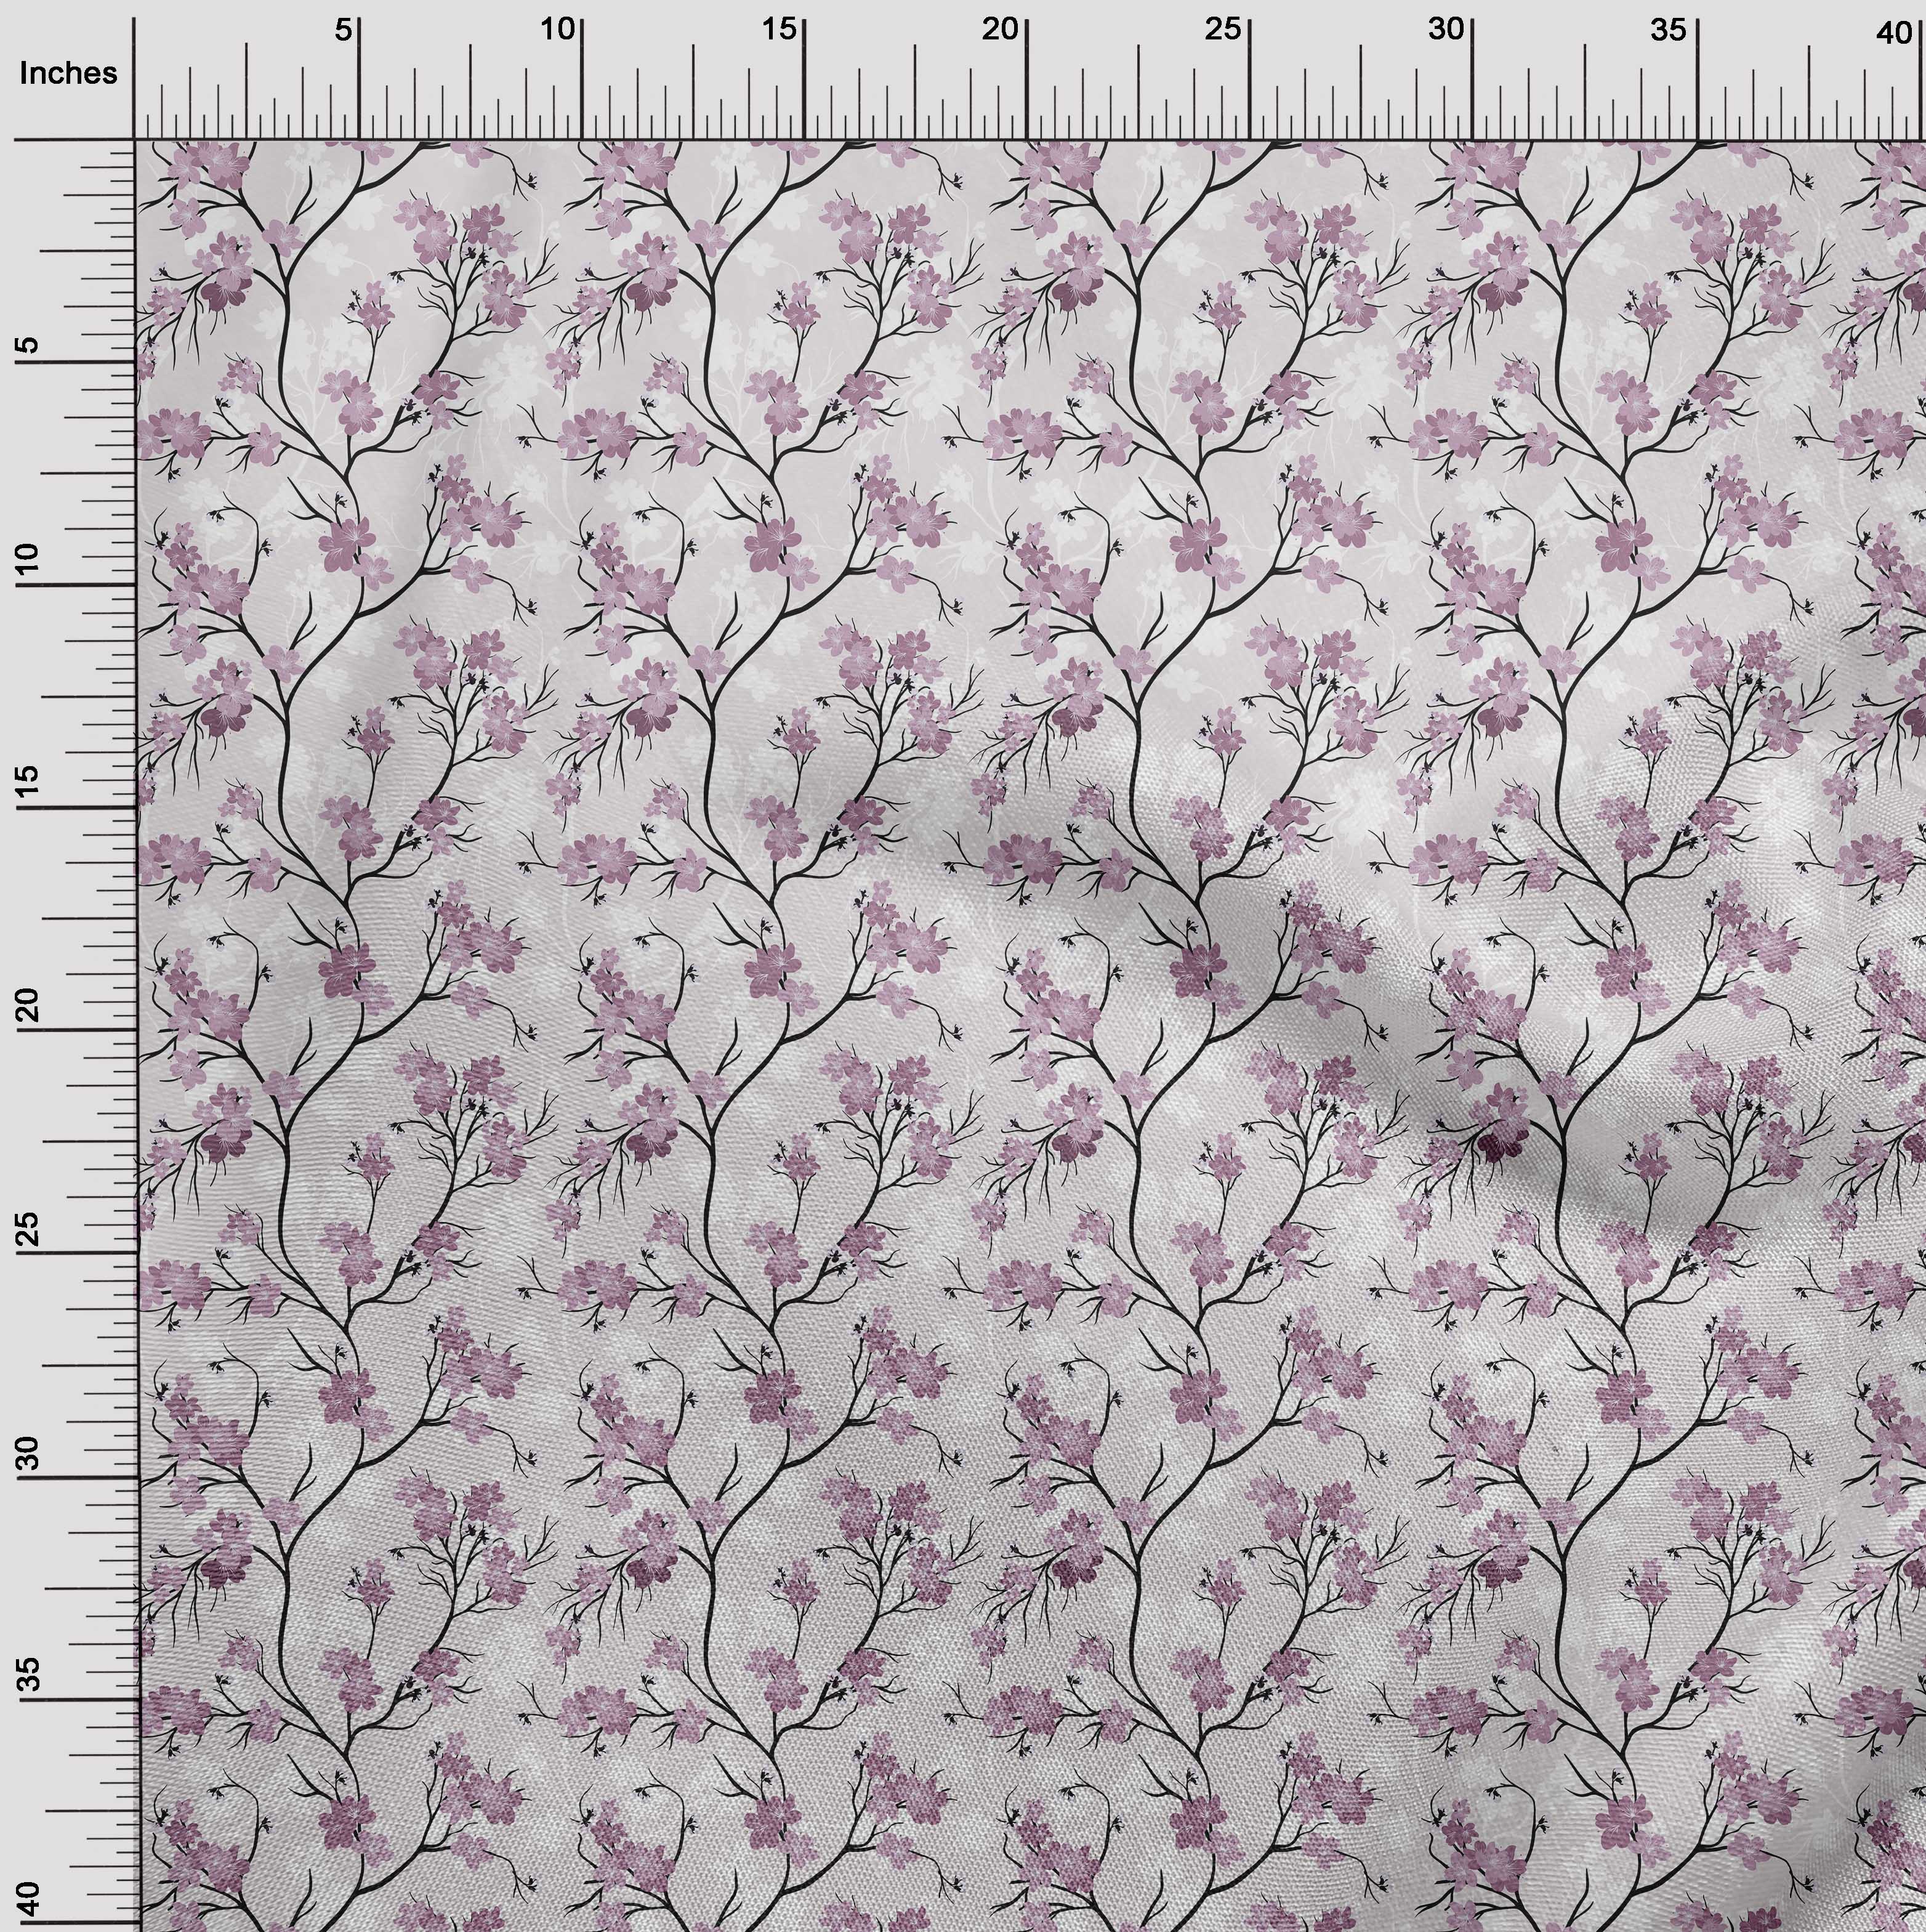 oneOone Cotton Cambric Lavender Fabric Floral Fabric For Sewing Printed Craft Fabric By The Yard 56 Inch Wide - image 4 of 5